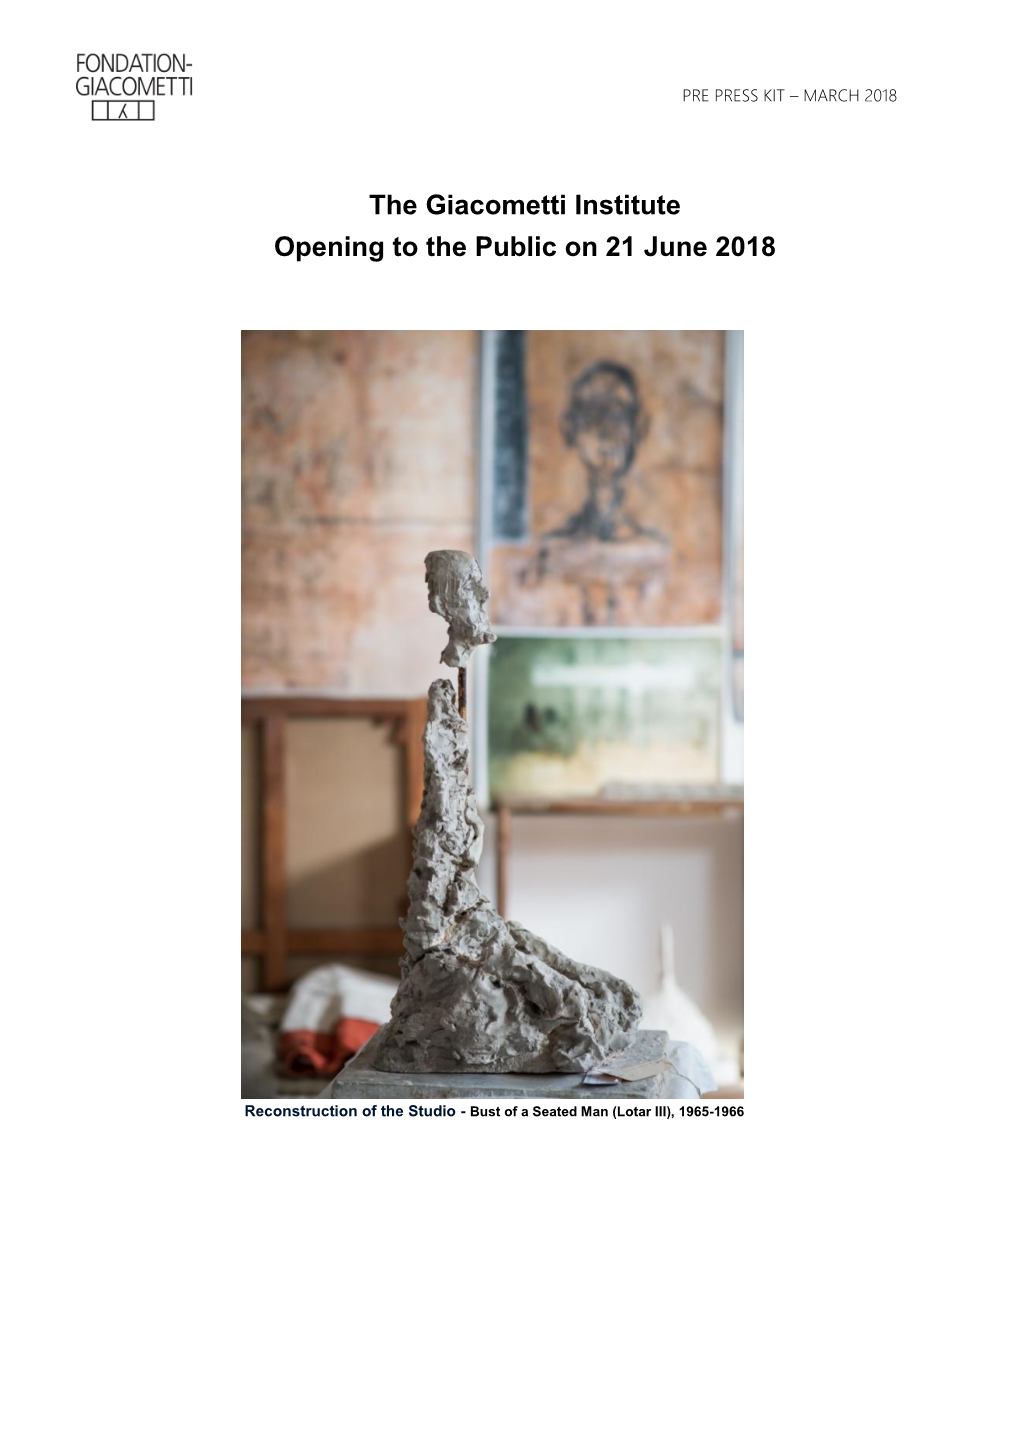 The Giacometti Institute Opening to the Public on 21 June 2018